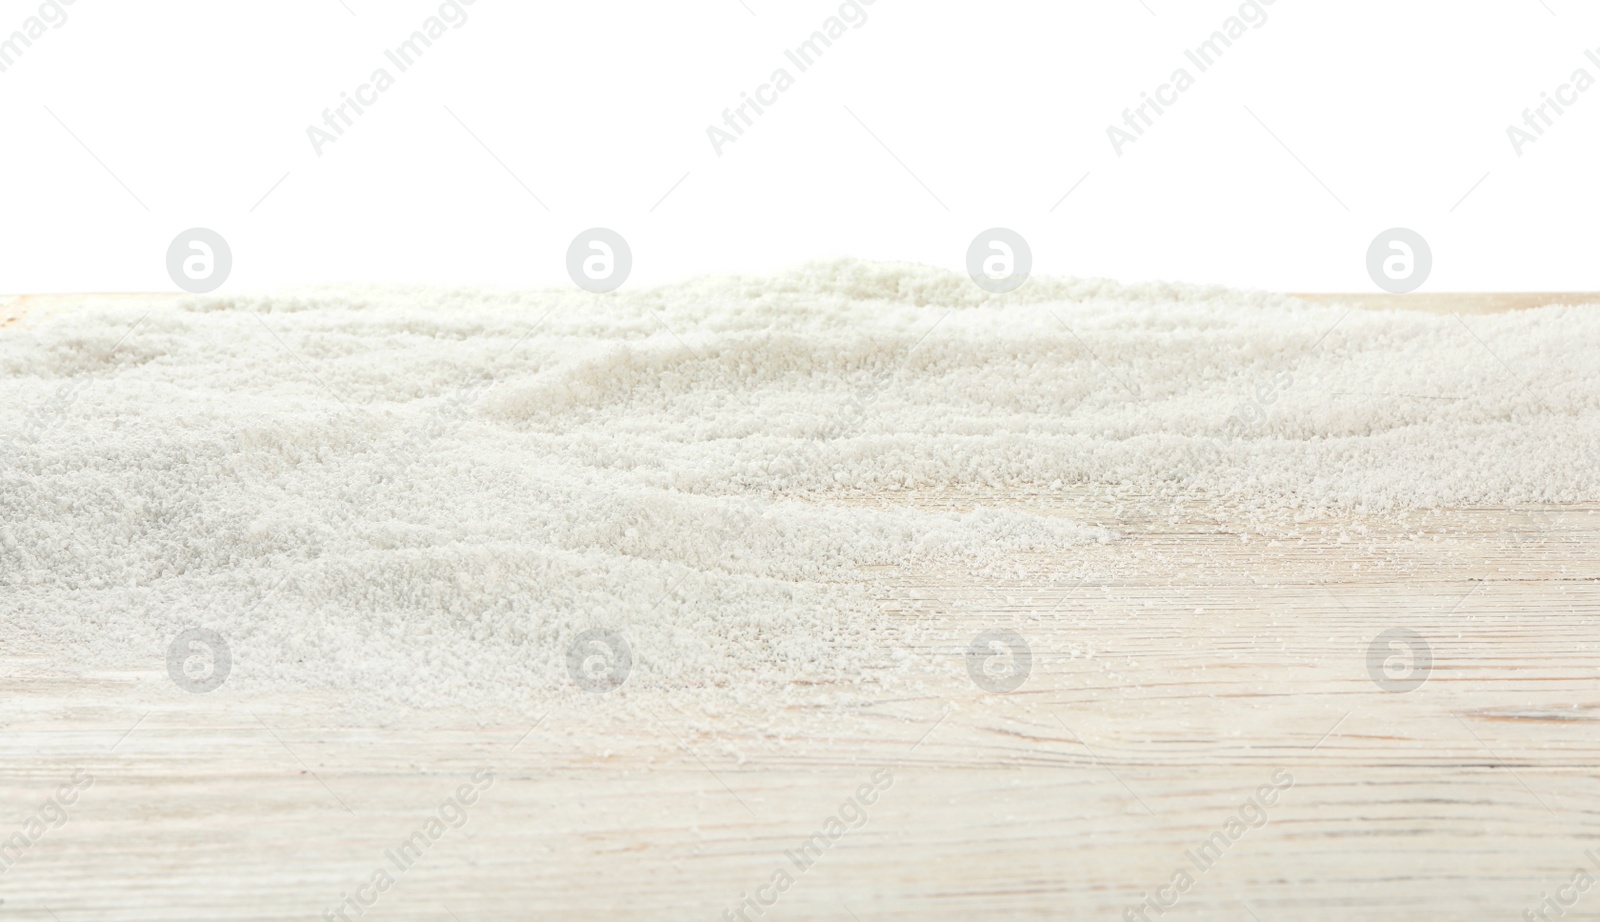 Photo of Artificial snow on wooden table against white background. Christmas decor